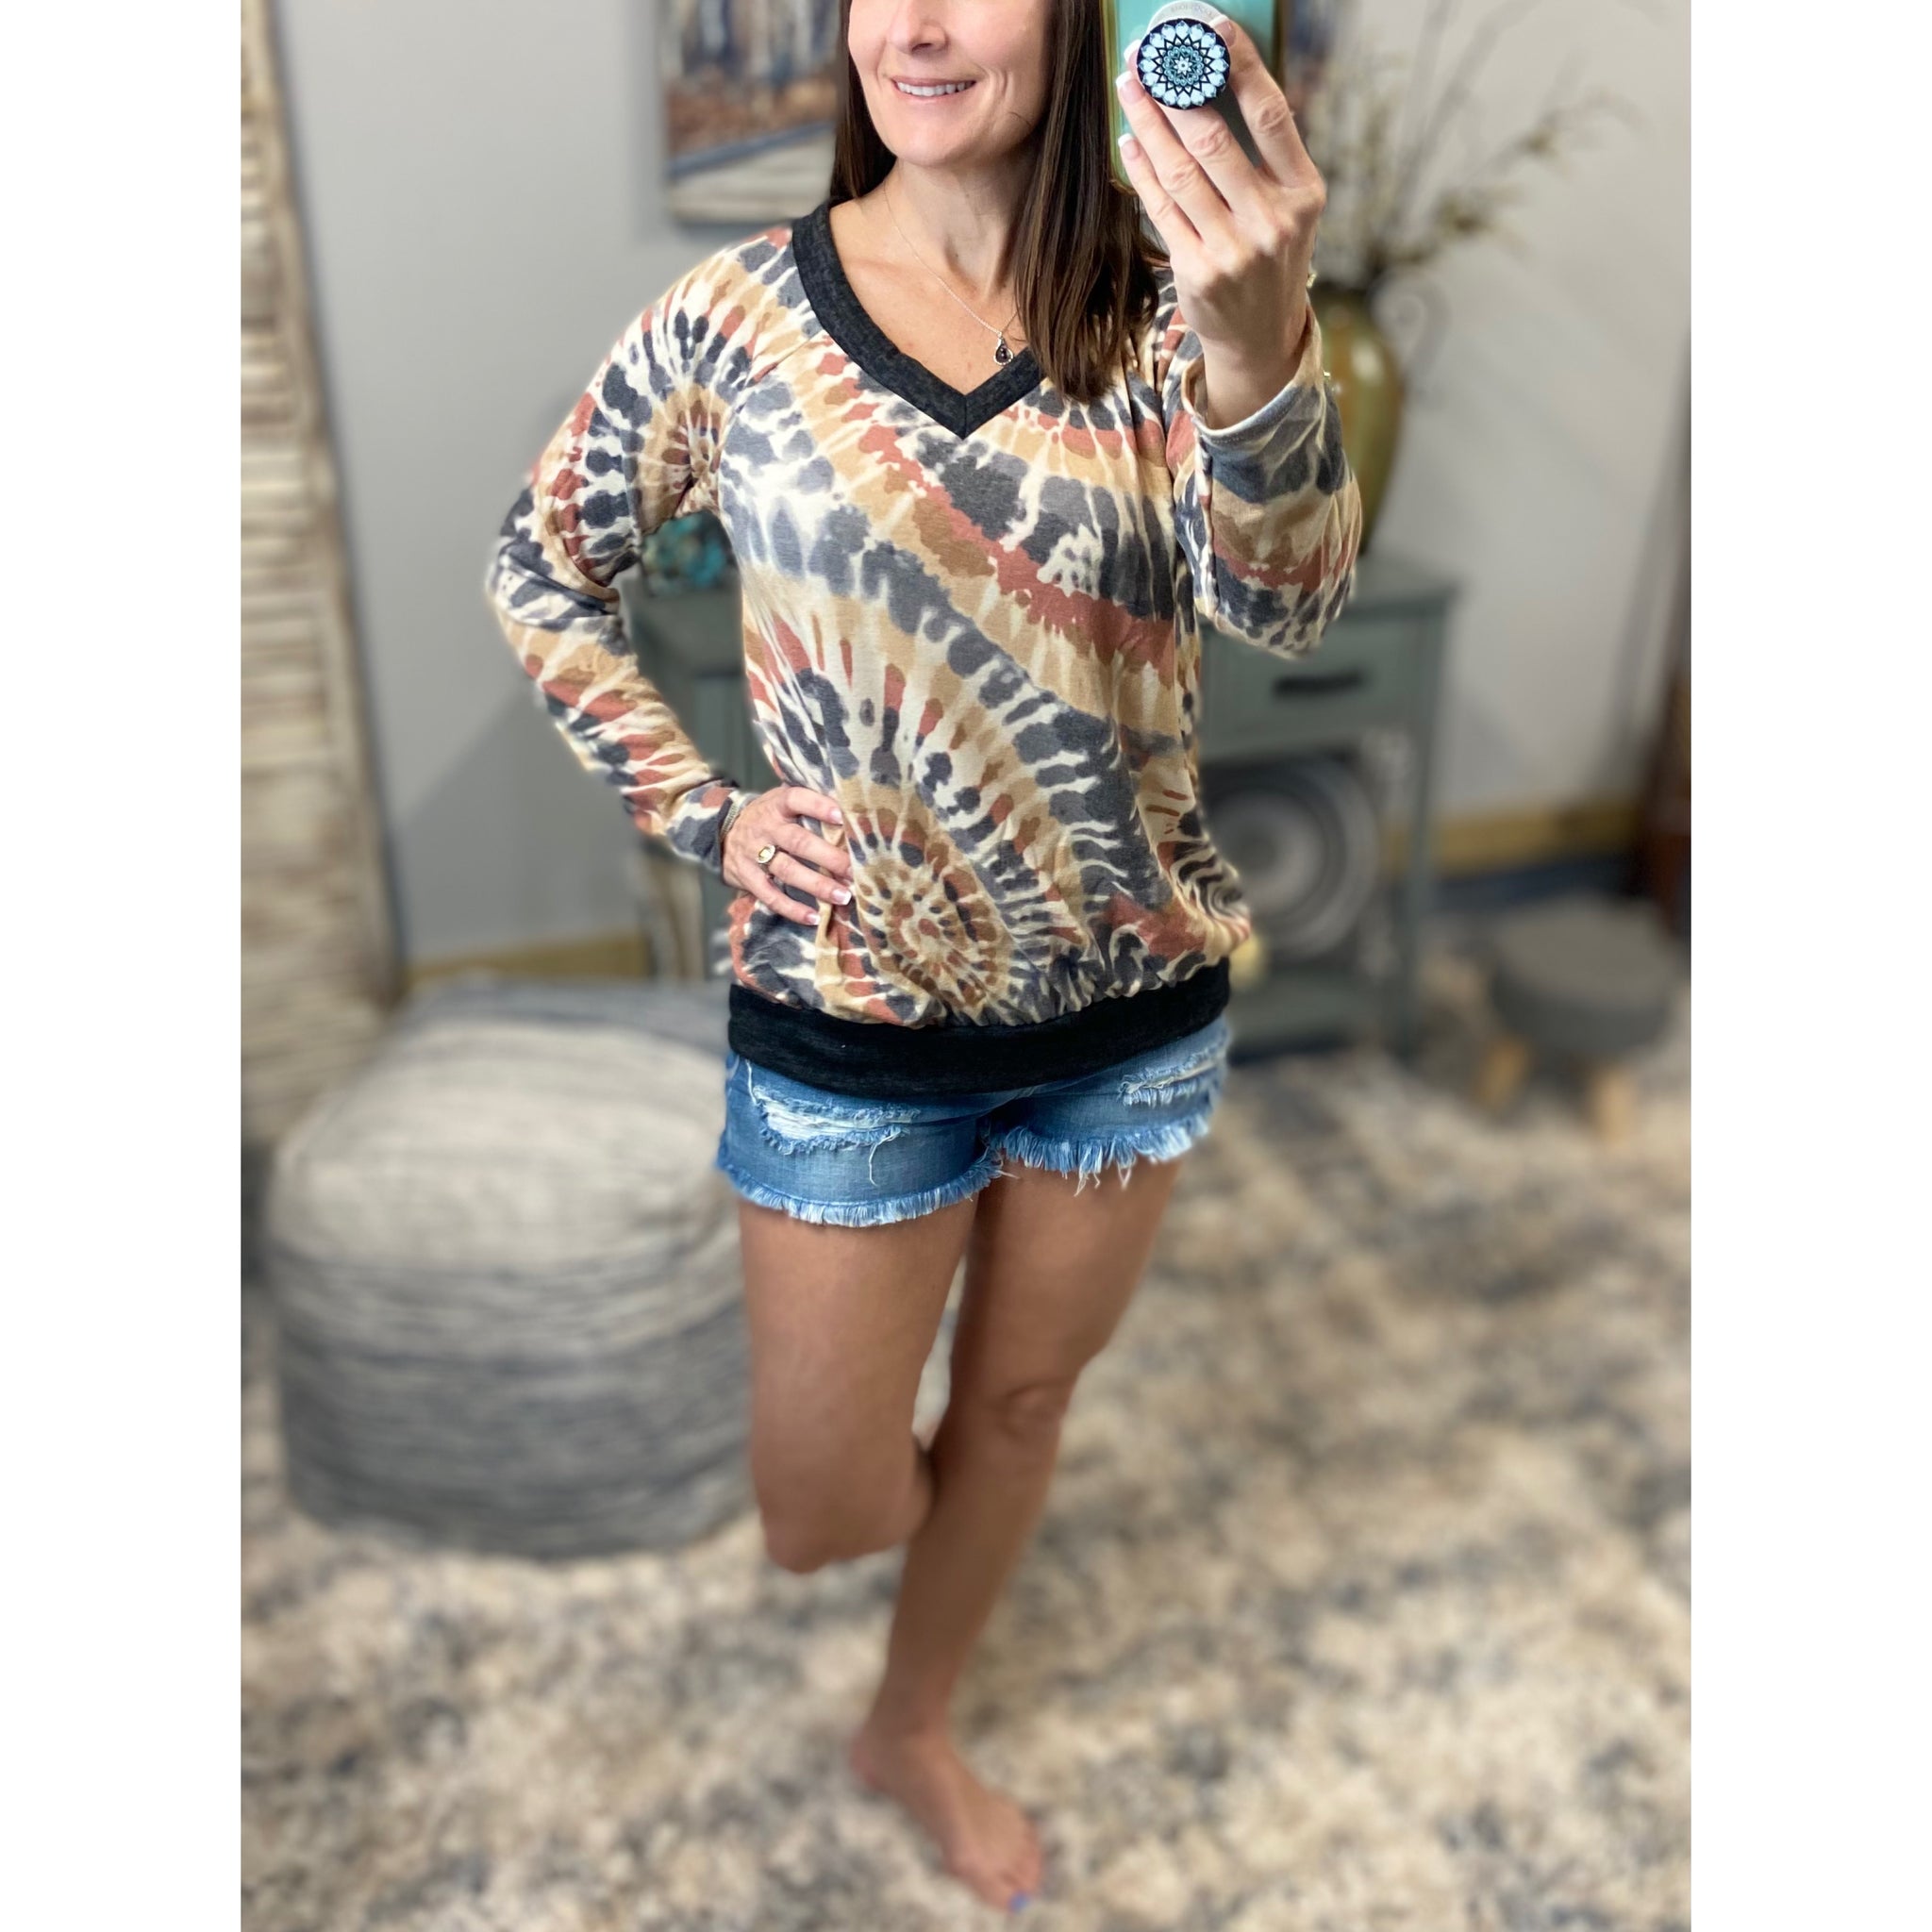 “When I Come Around” Swirl Tie Dye French Terry Long Sleeve V-Neck Banded Bottom Top Multi